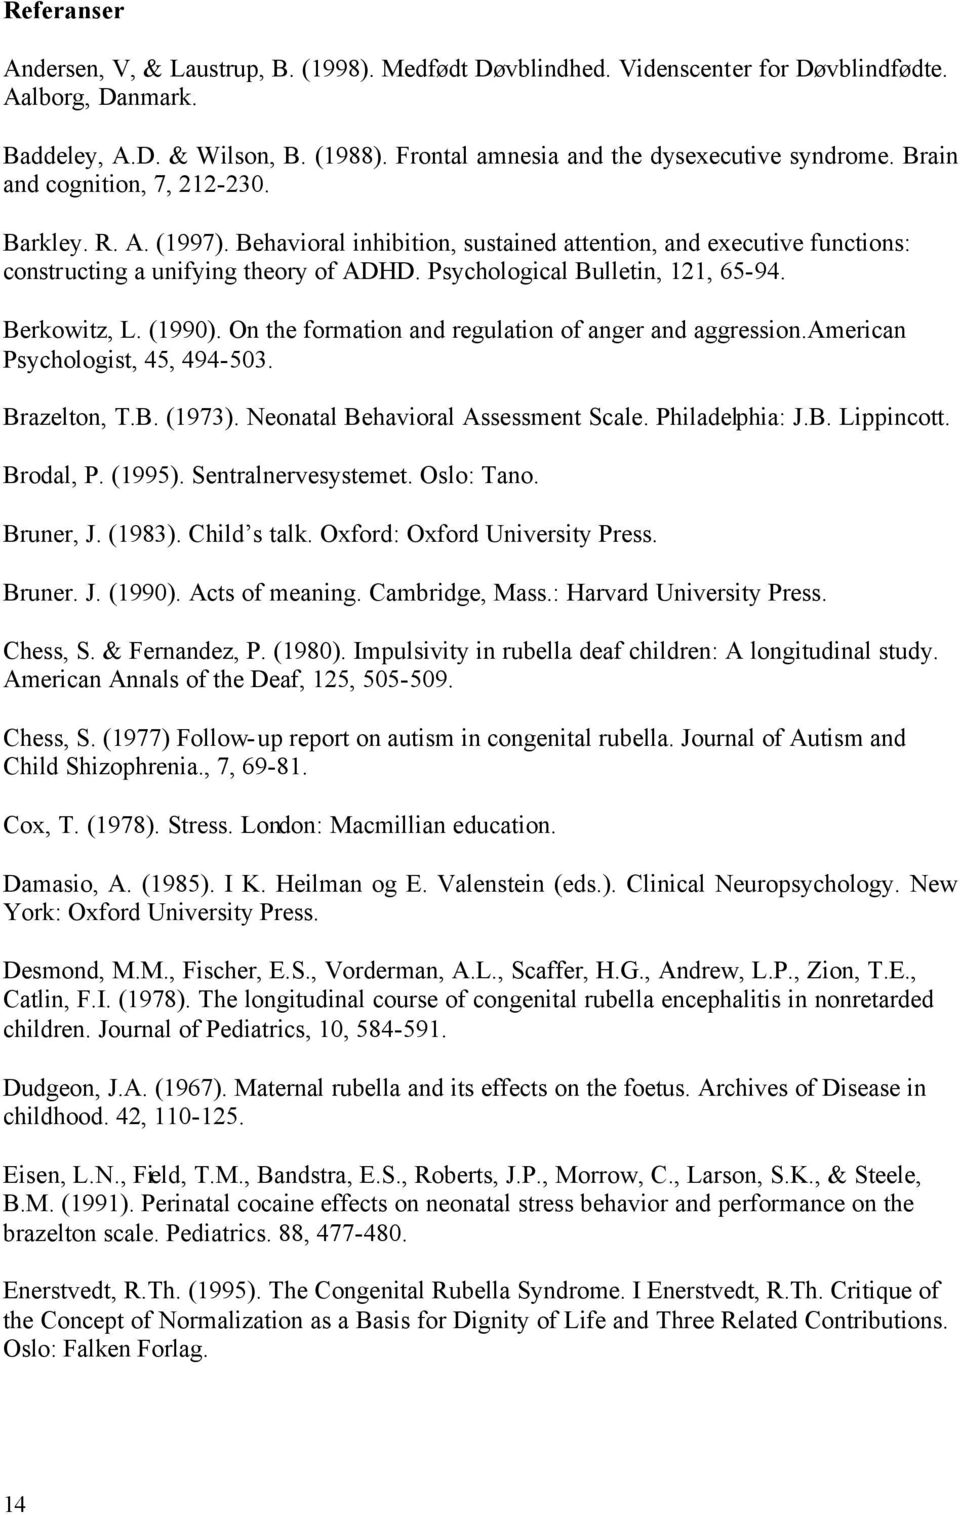 Berkowitz, L. (1990). On the formation and regulation of anger and aggression.american Psychologist, 45, 494-503. Brazelton, T.B. (1973). Neonatal Behavioral Assessment Scale. Philadelphia: J.B. Lippincott.